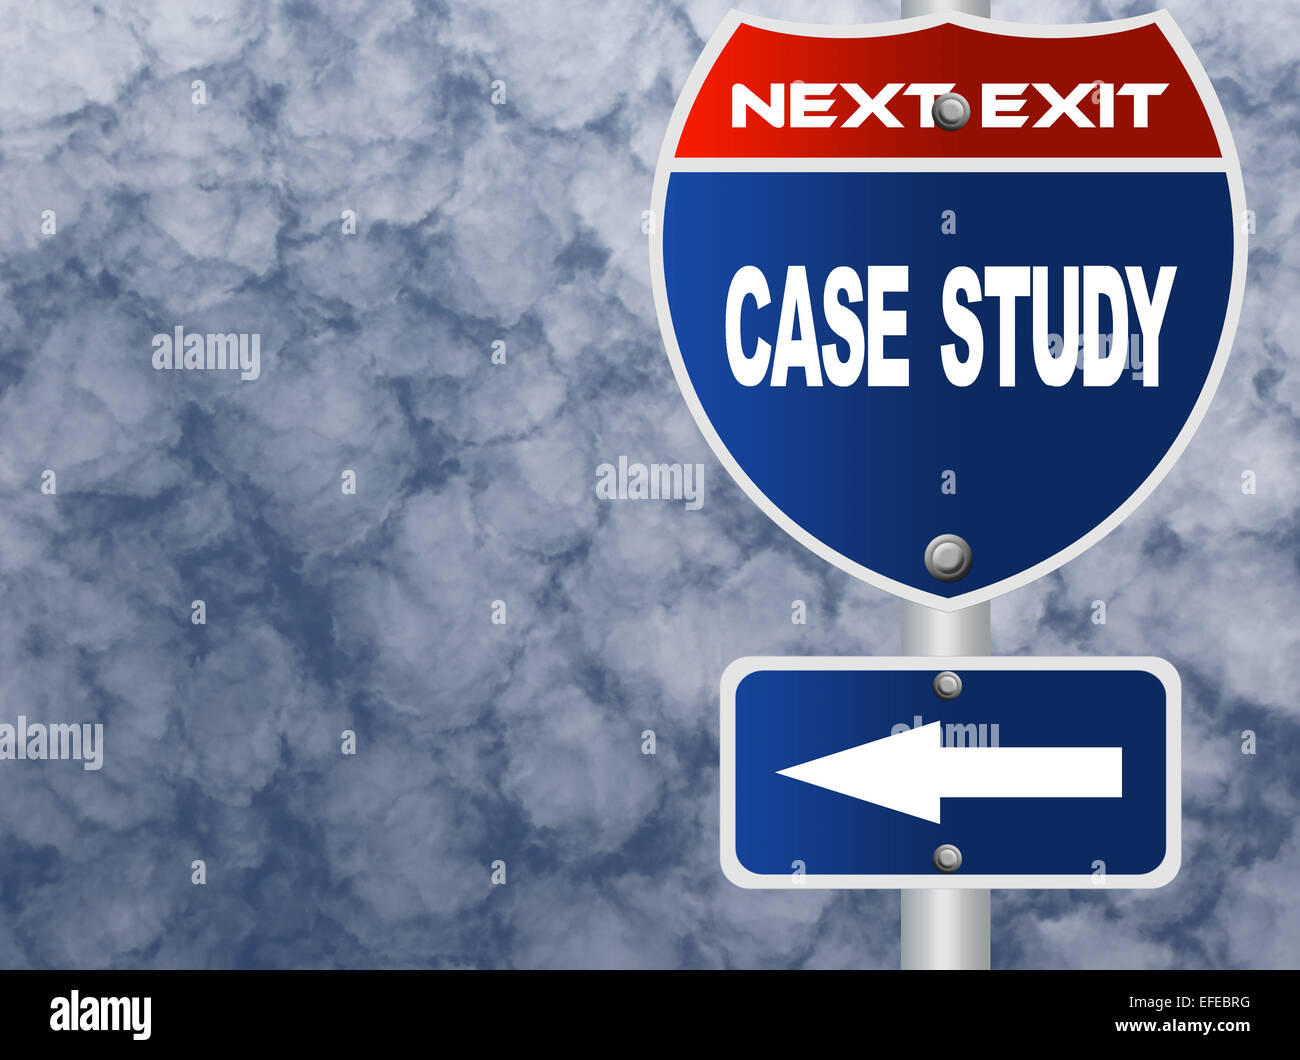 Case study road sign Stock Photo